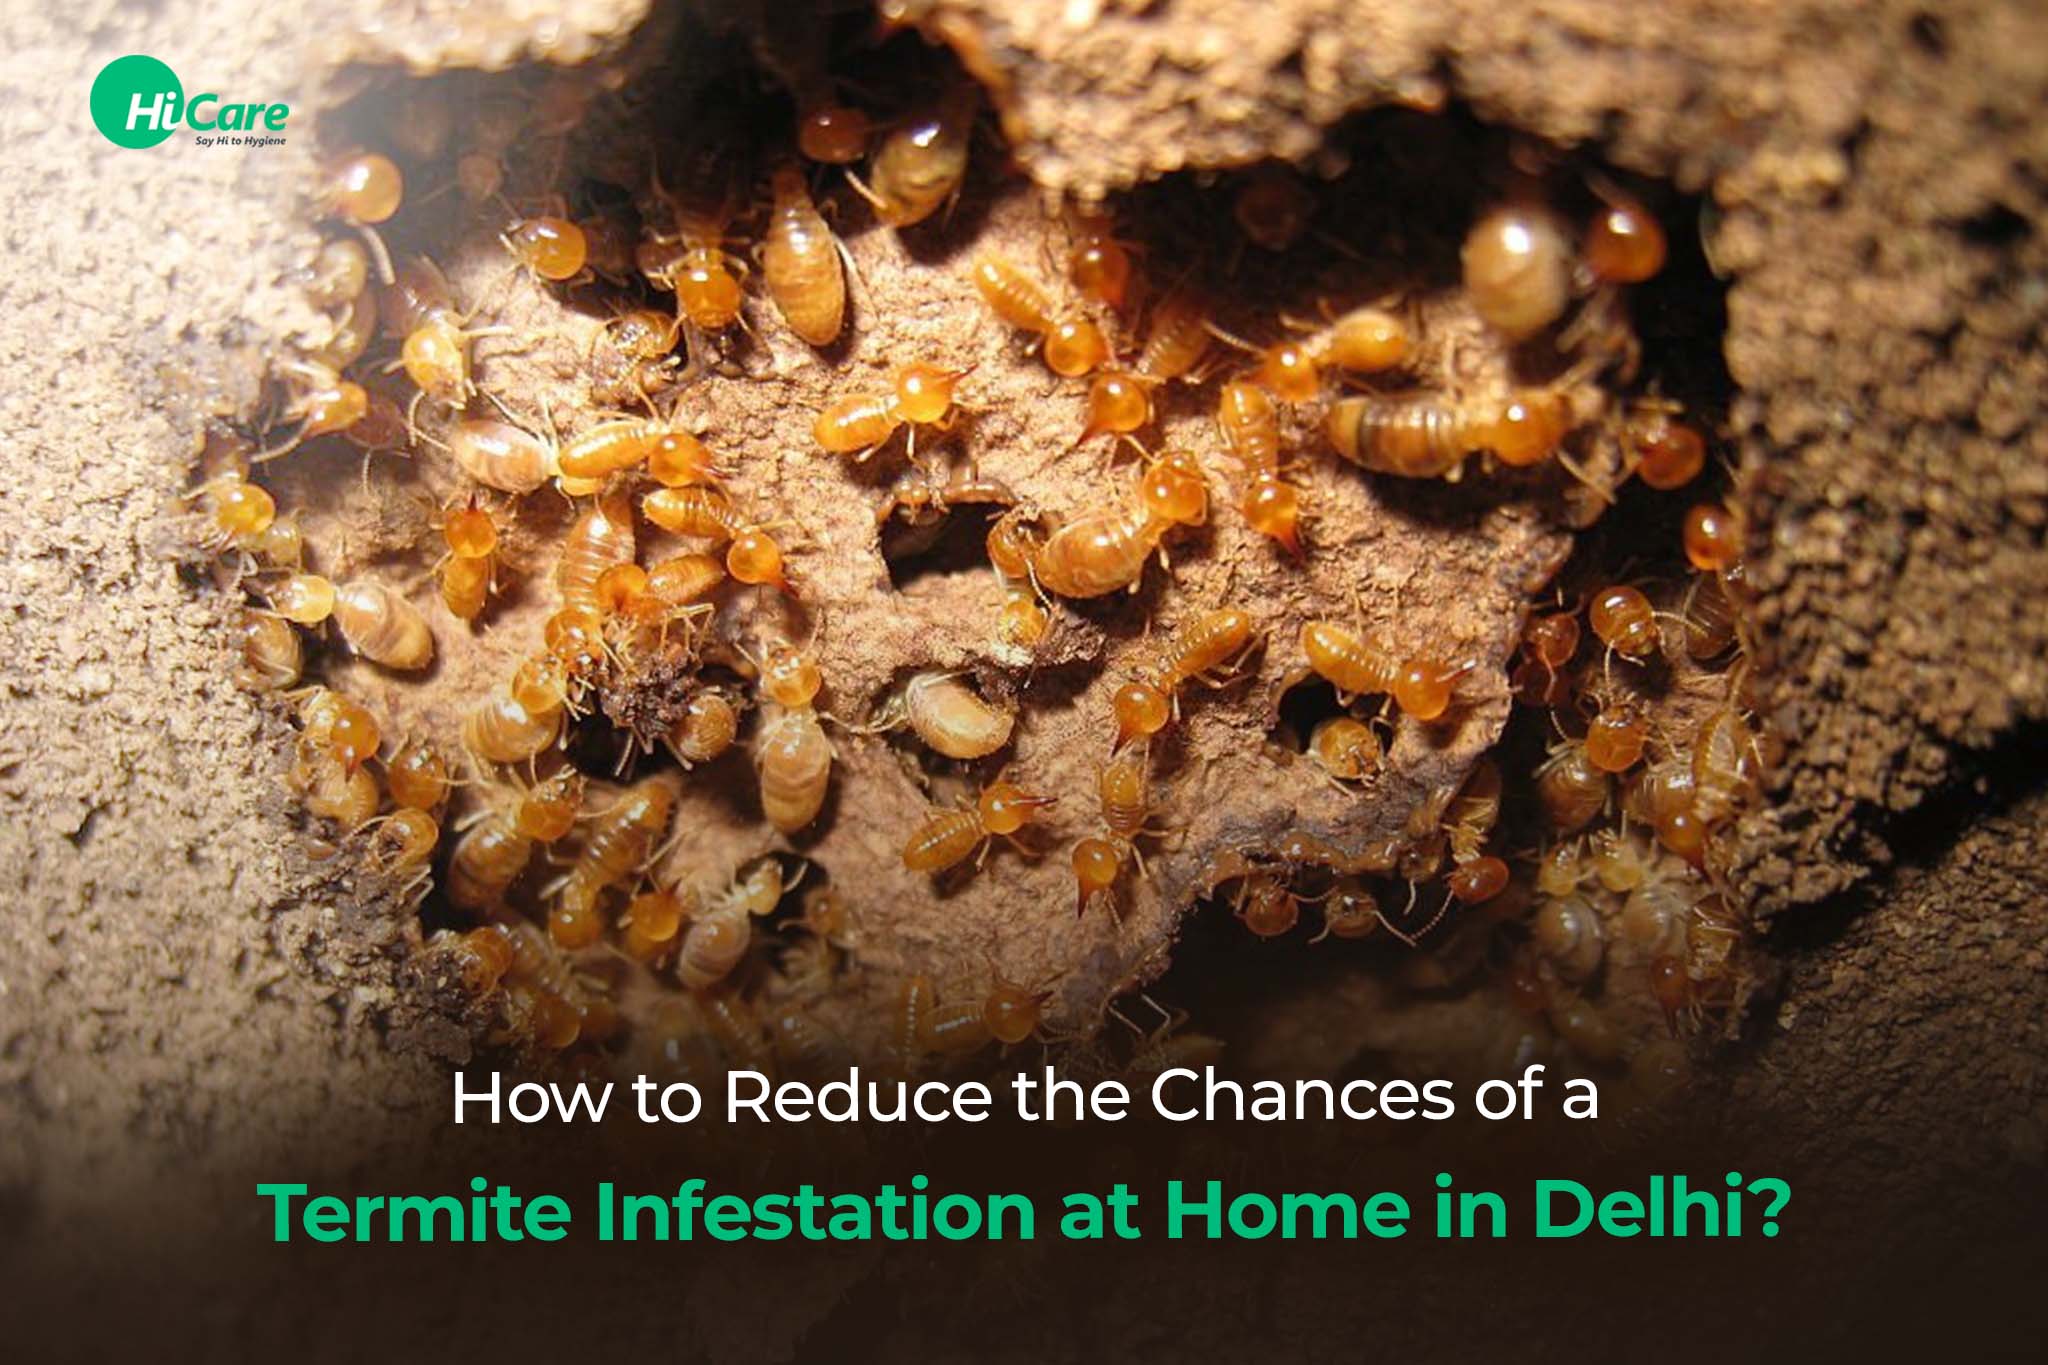 How to Reduce the Chances of a Termite Infestation at Home in Delhi?